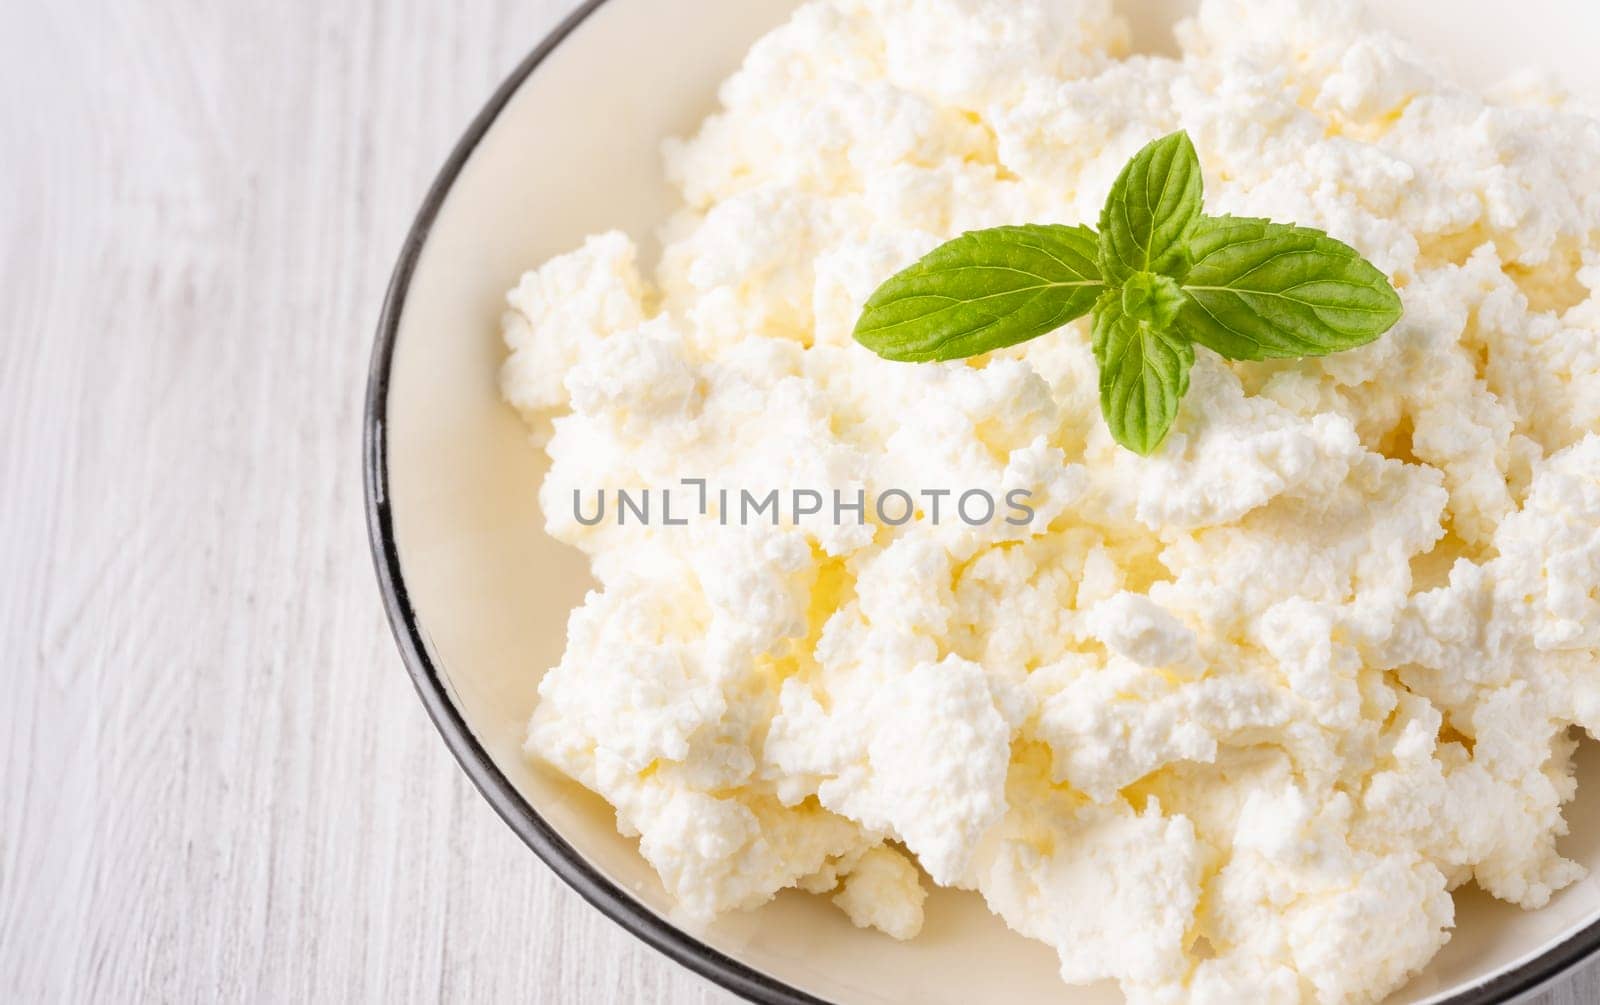 Cottage cheese in a plate on a white table, with copy space for text.